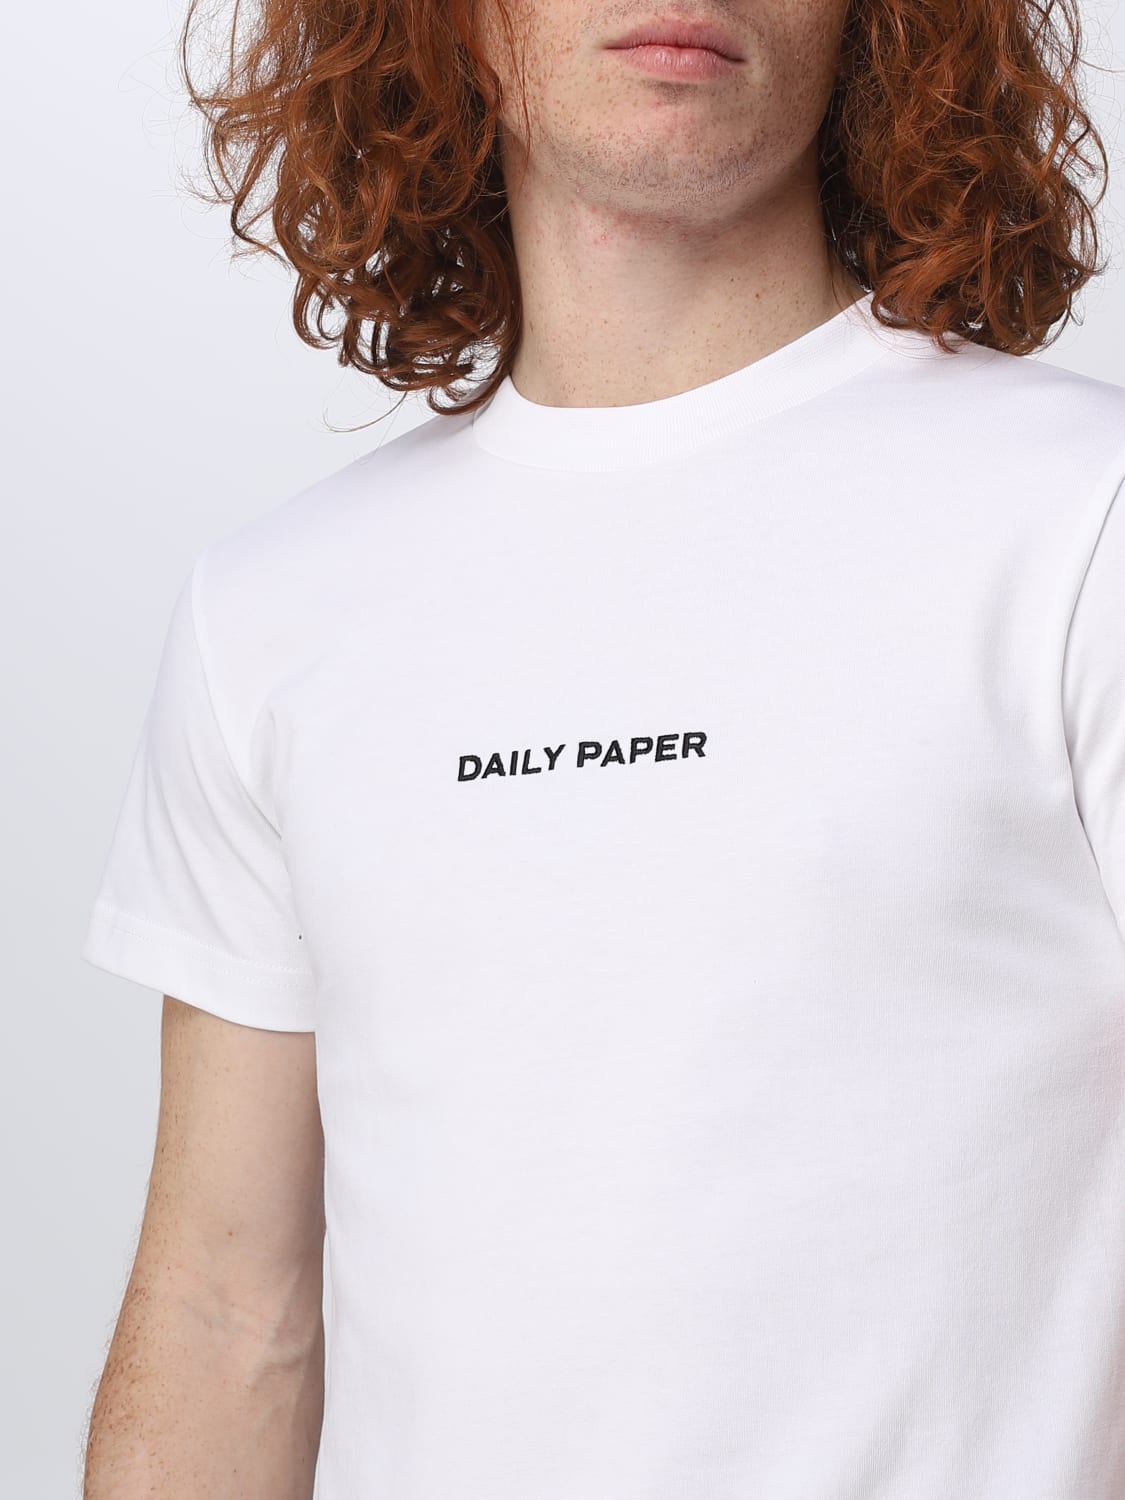 Obsessie vonnis grens DAILY PAPER: t-shirt for man - White | Daily Paper t-shirt 2122017 online  on GIGLIO.COM